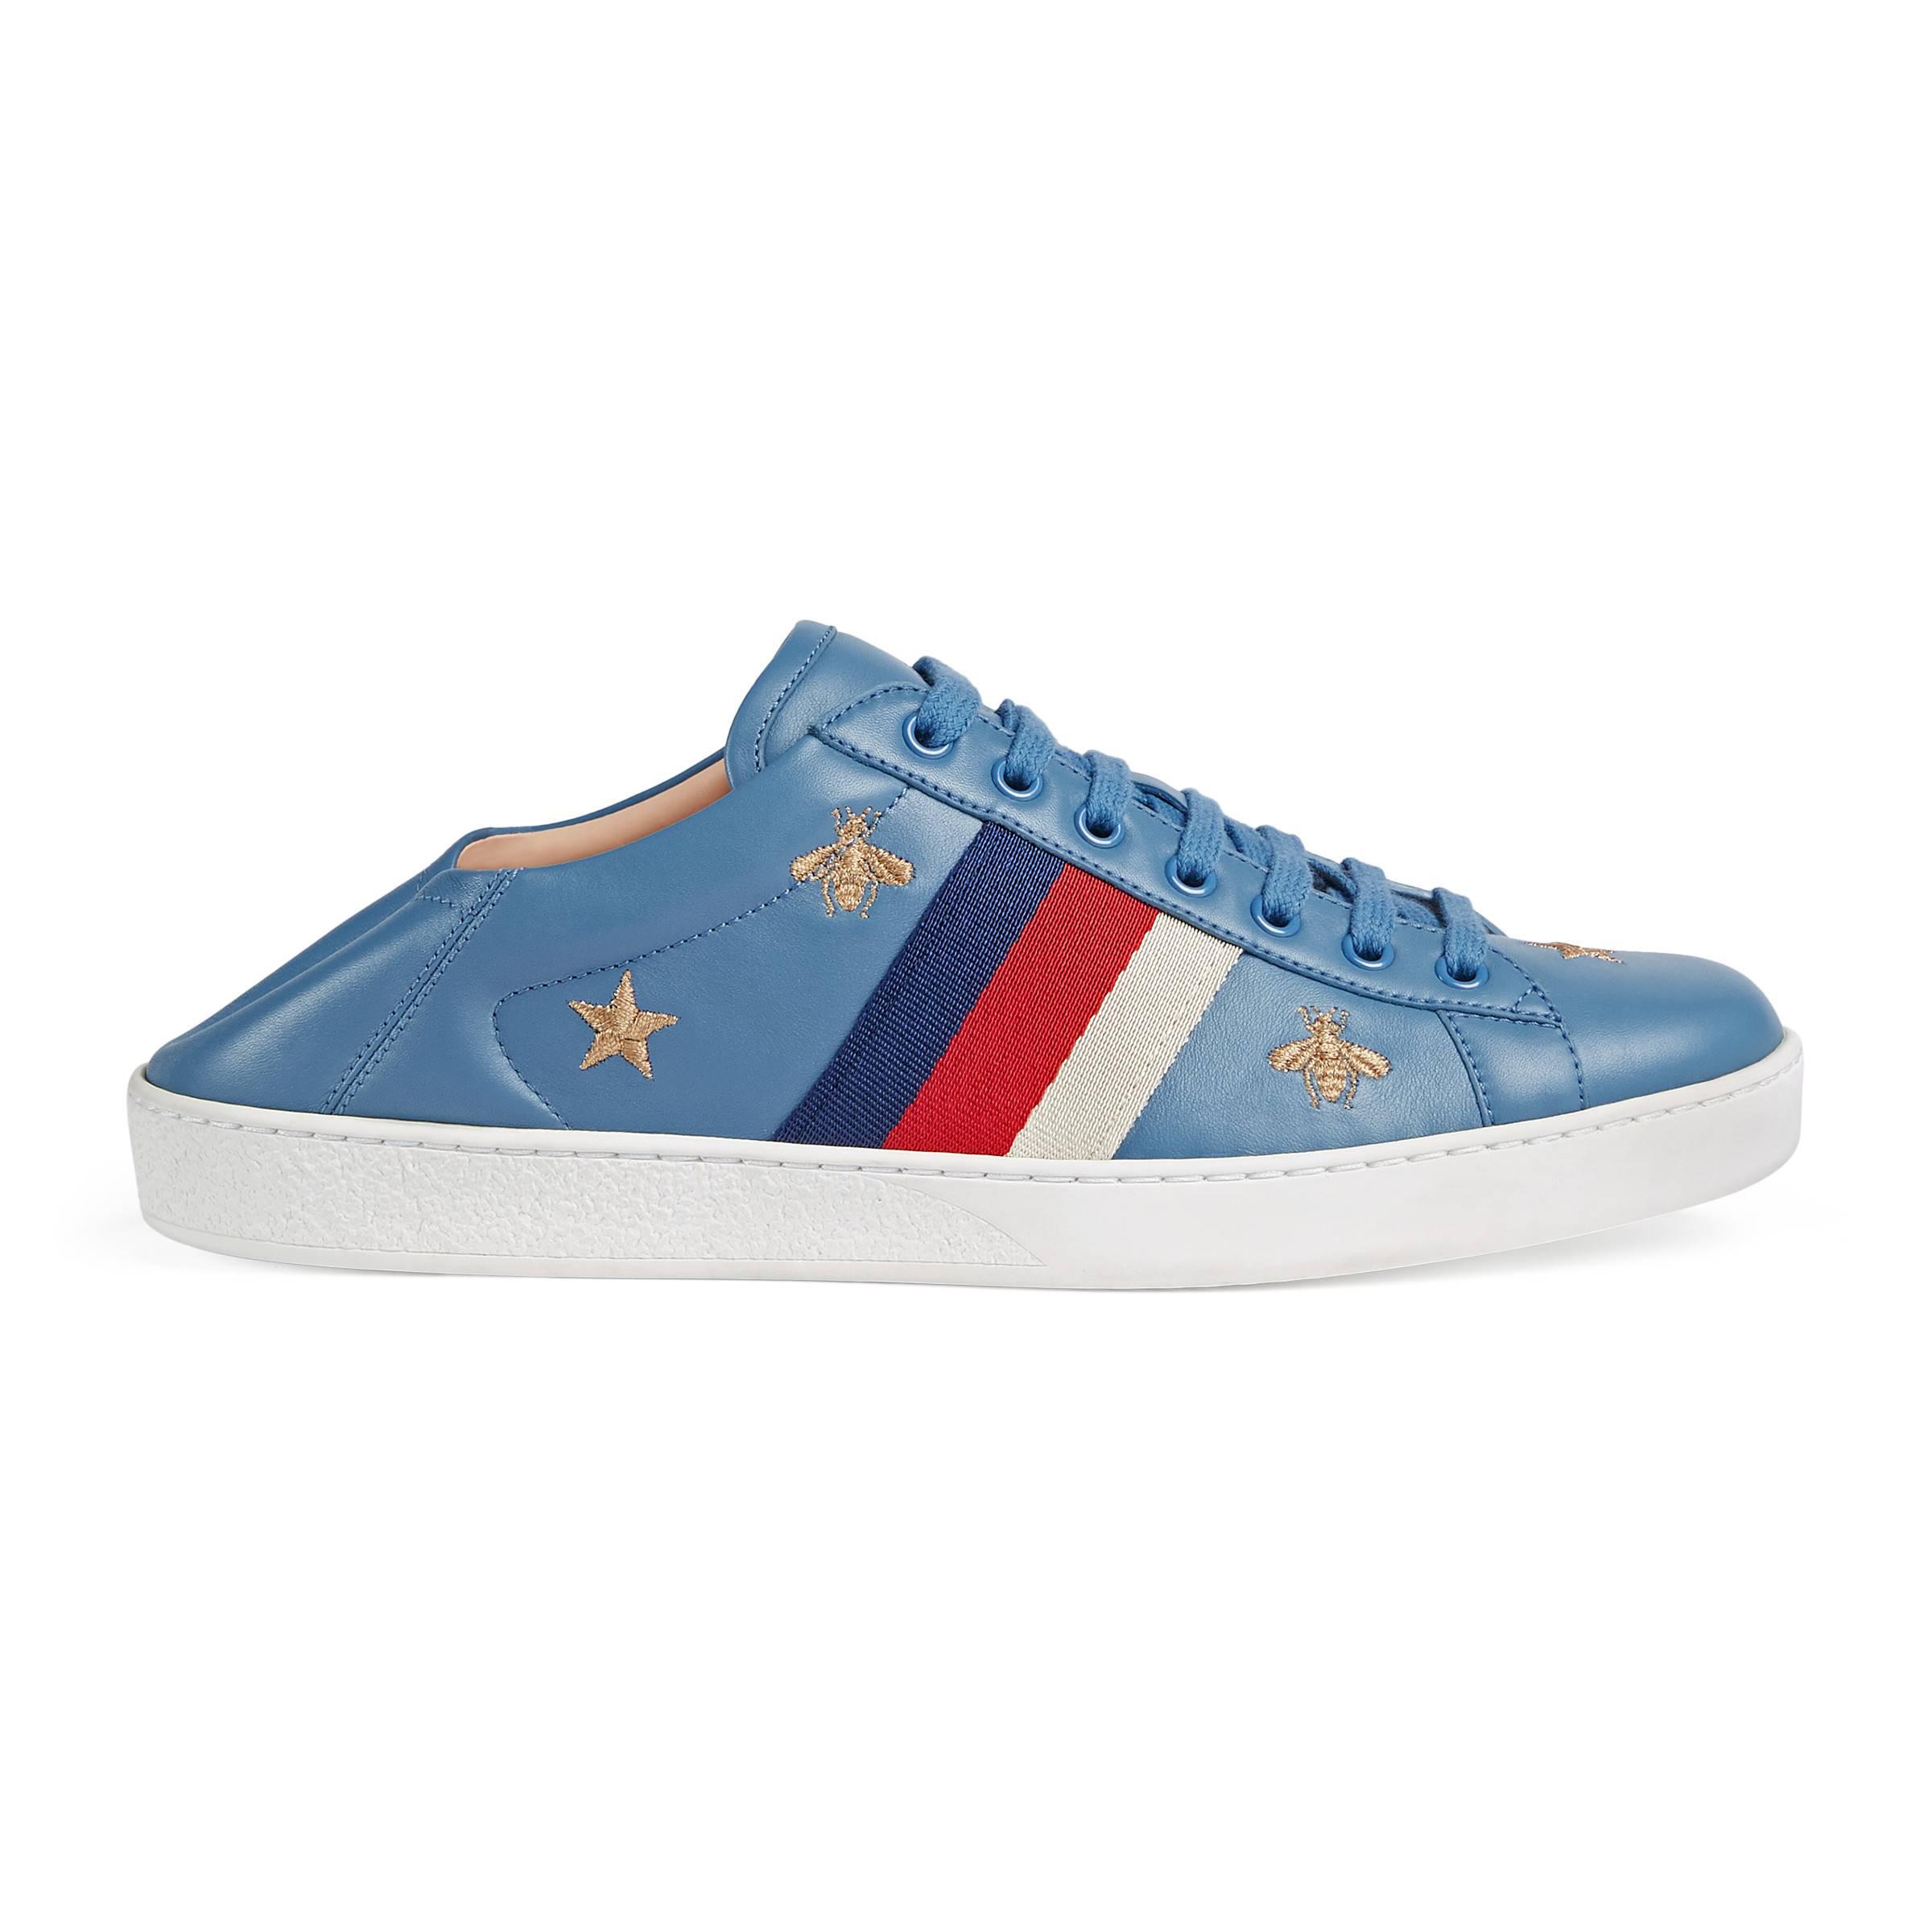 Gucci Leather Ace Sneaker With Bees And Stars in Blue Leather 